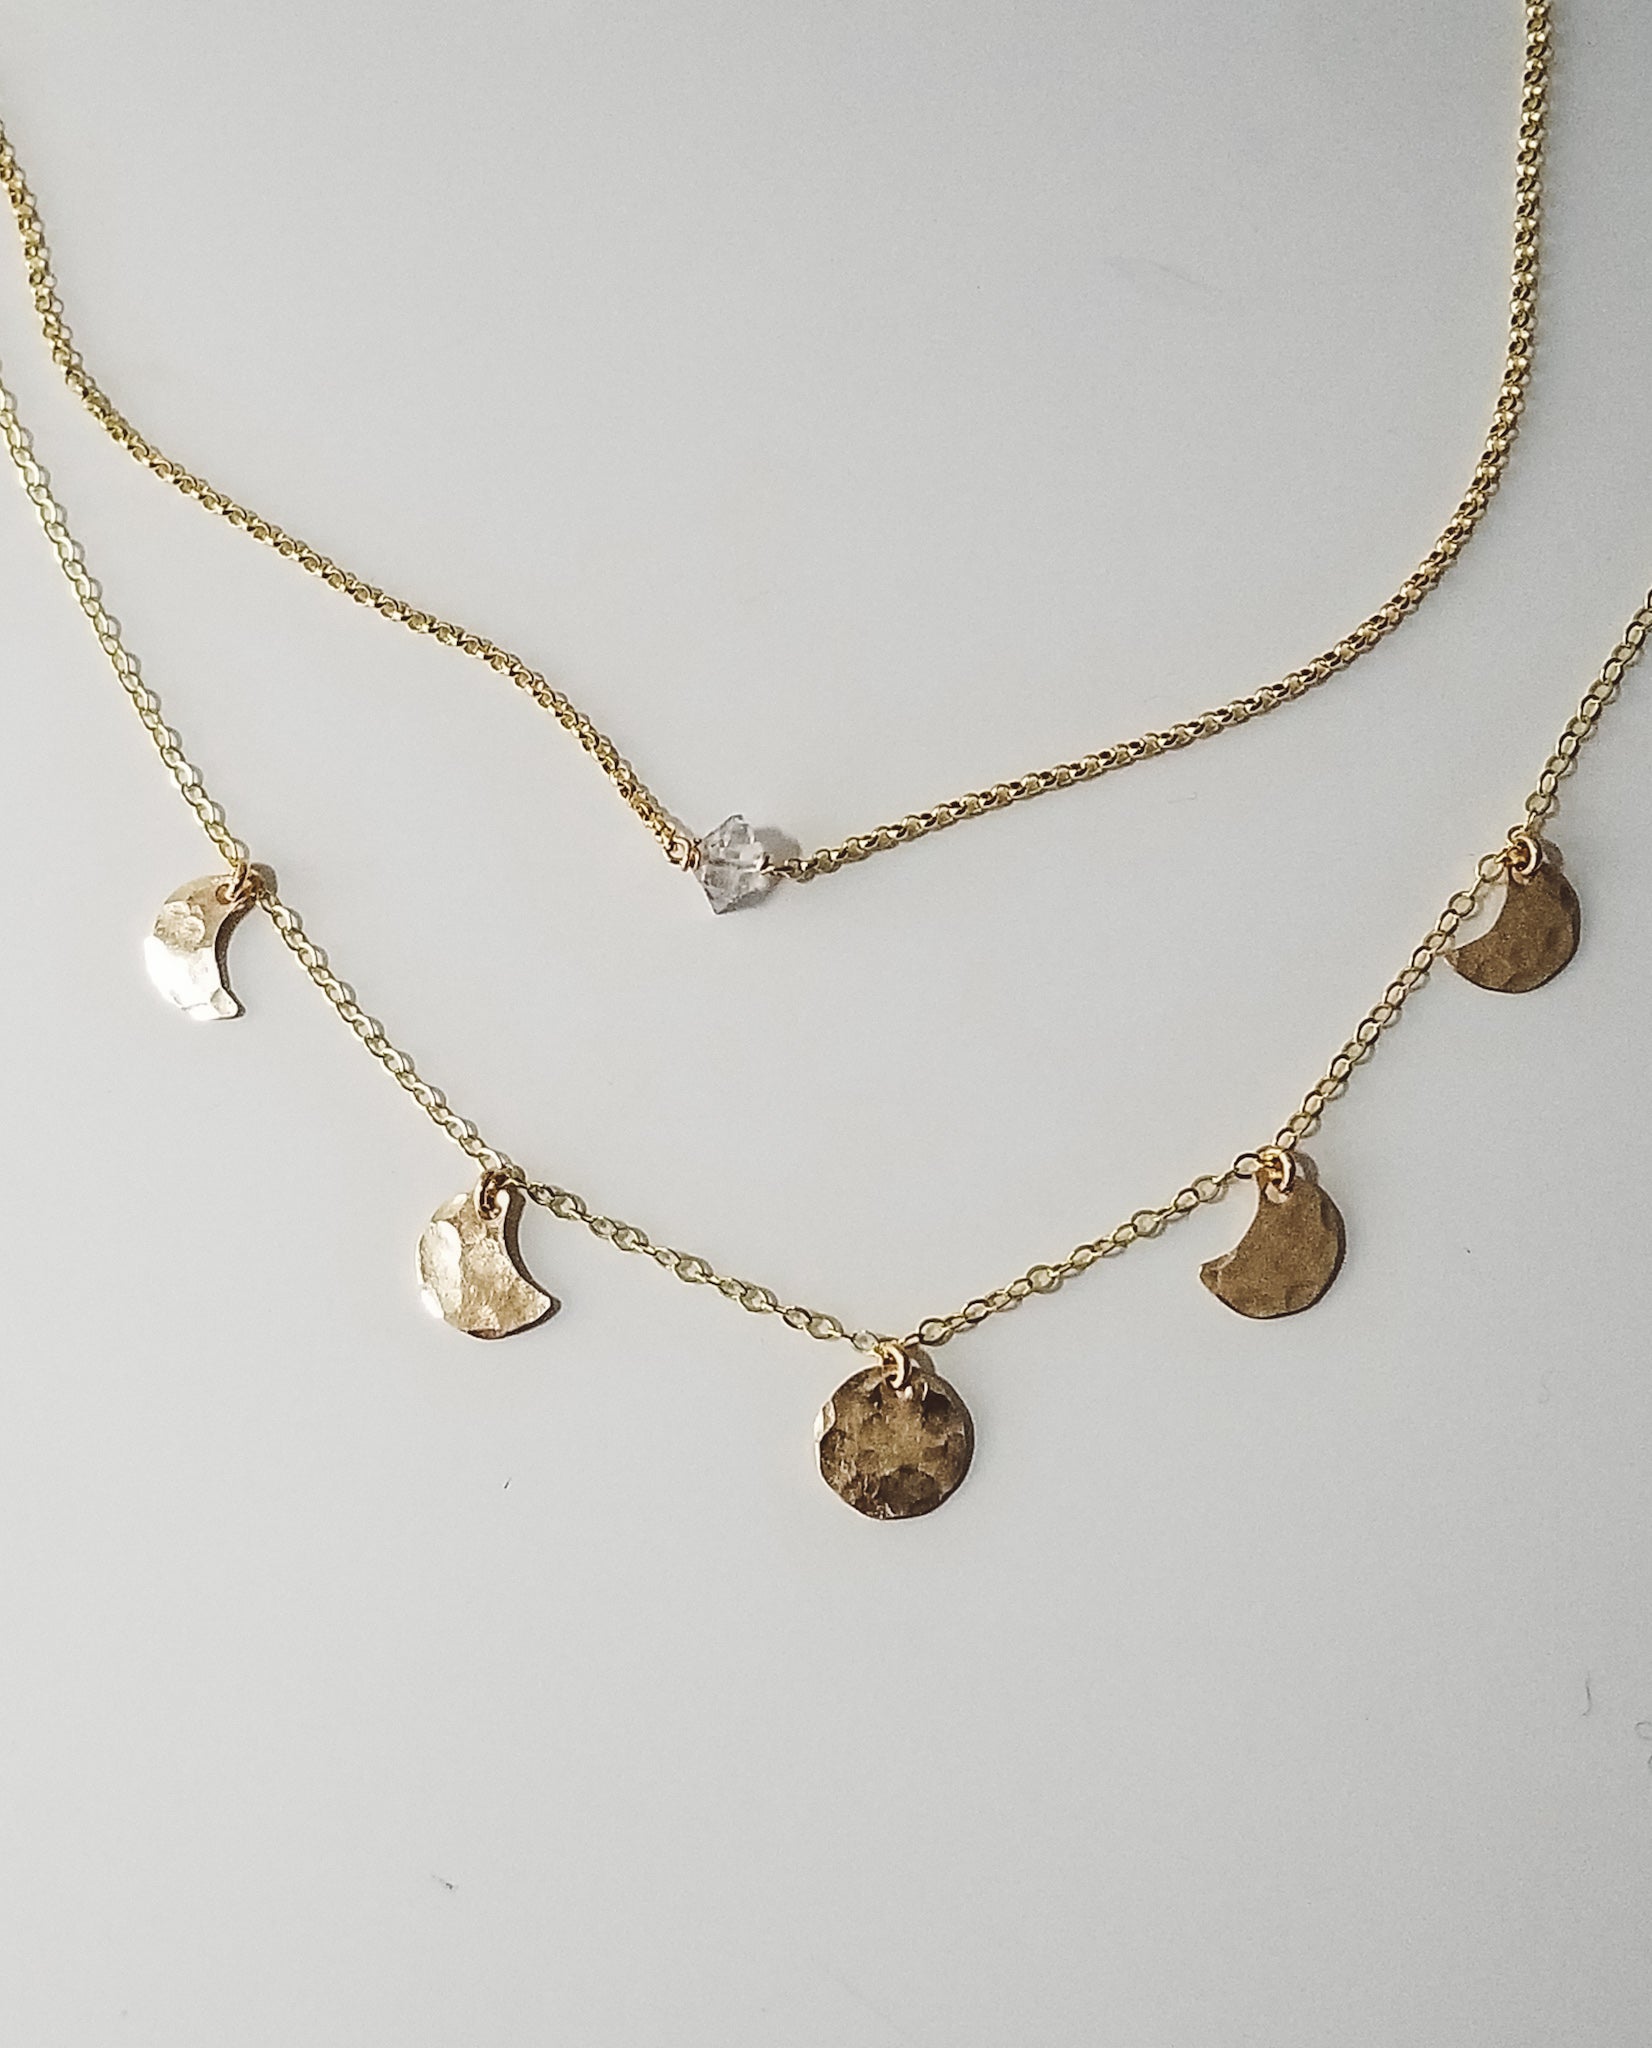 a herkimer diamond on a gold chain and a hammered metal moon phase necklace in gold on a white background